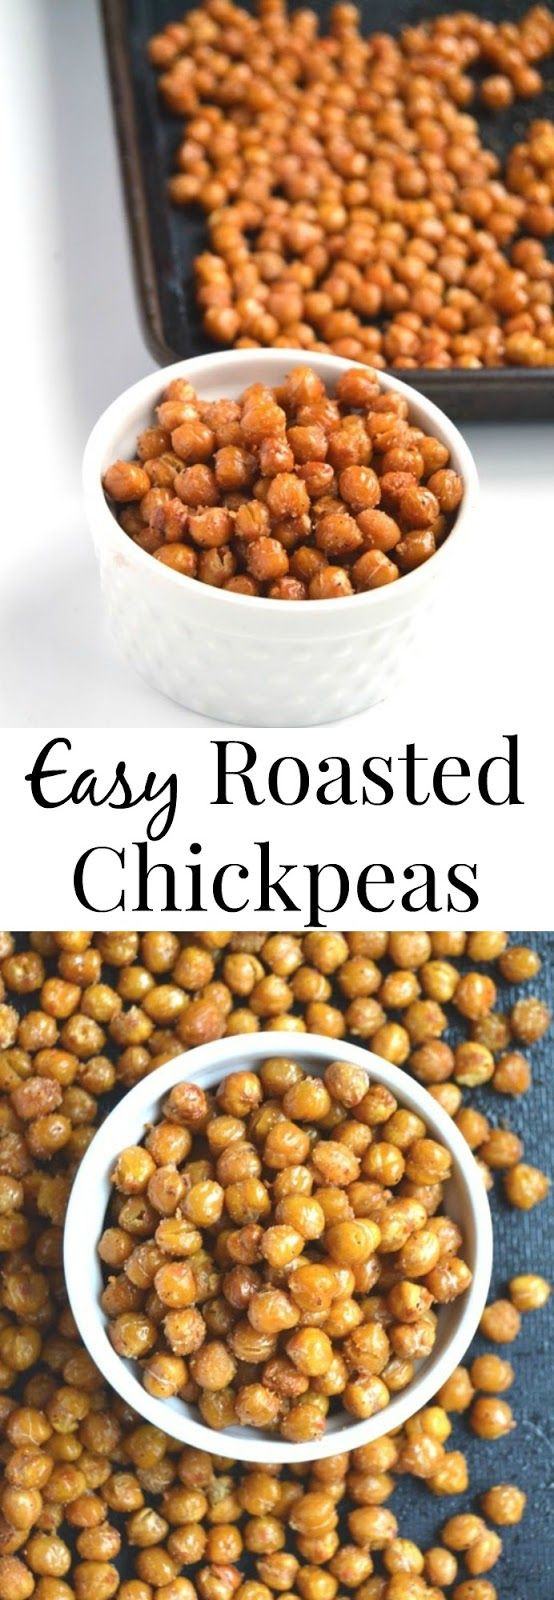 Healthy But Filling Snacks
 Roasted Chickpeas